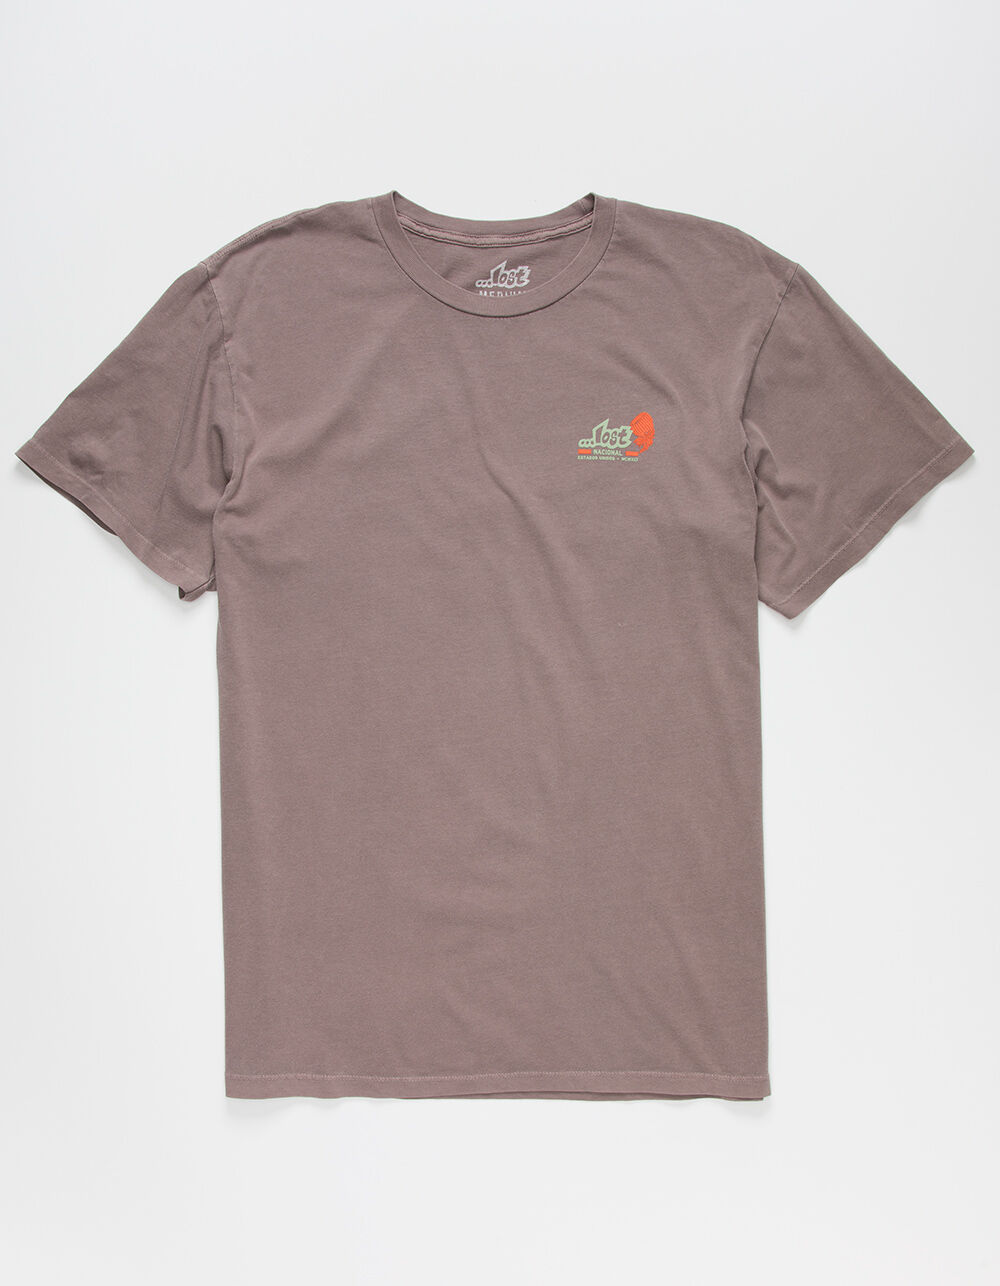 LOST Late Bloomer Mens T-Shirt - TAUPE | Tillys